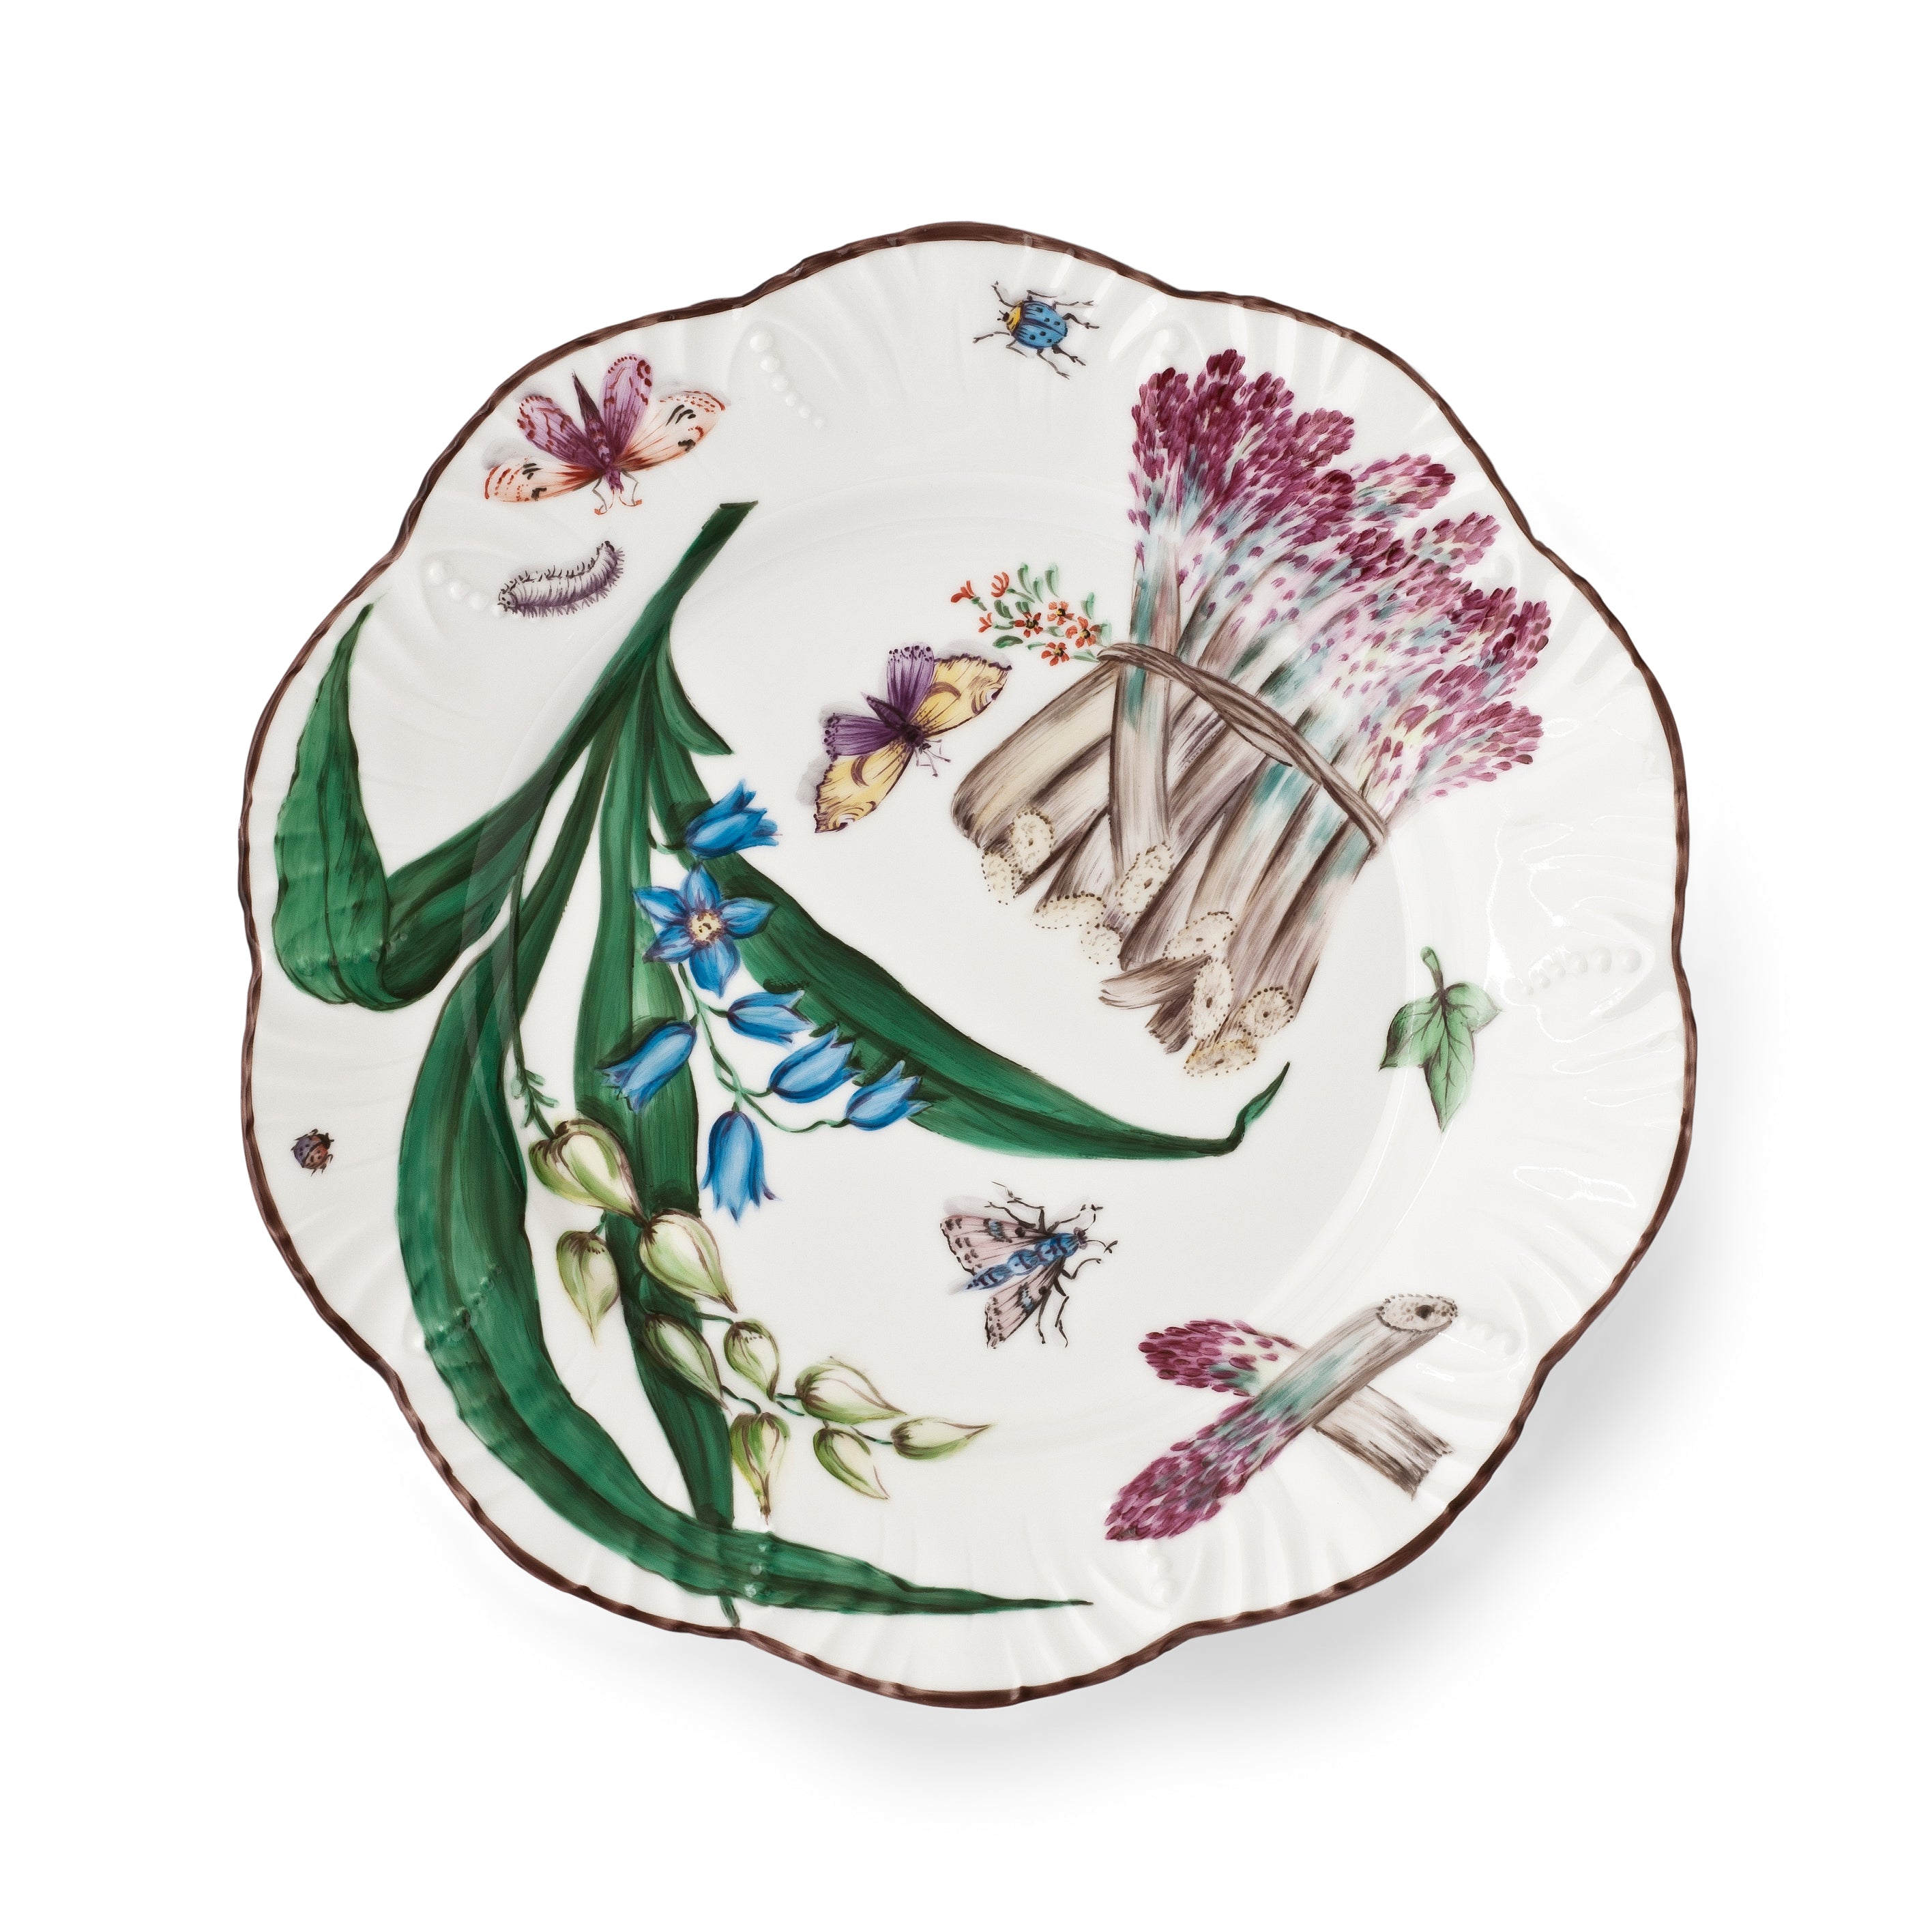 Feuillages - Dinner plate 12